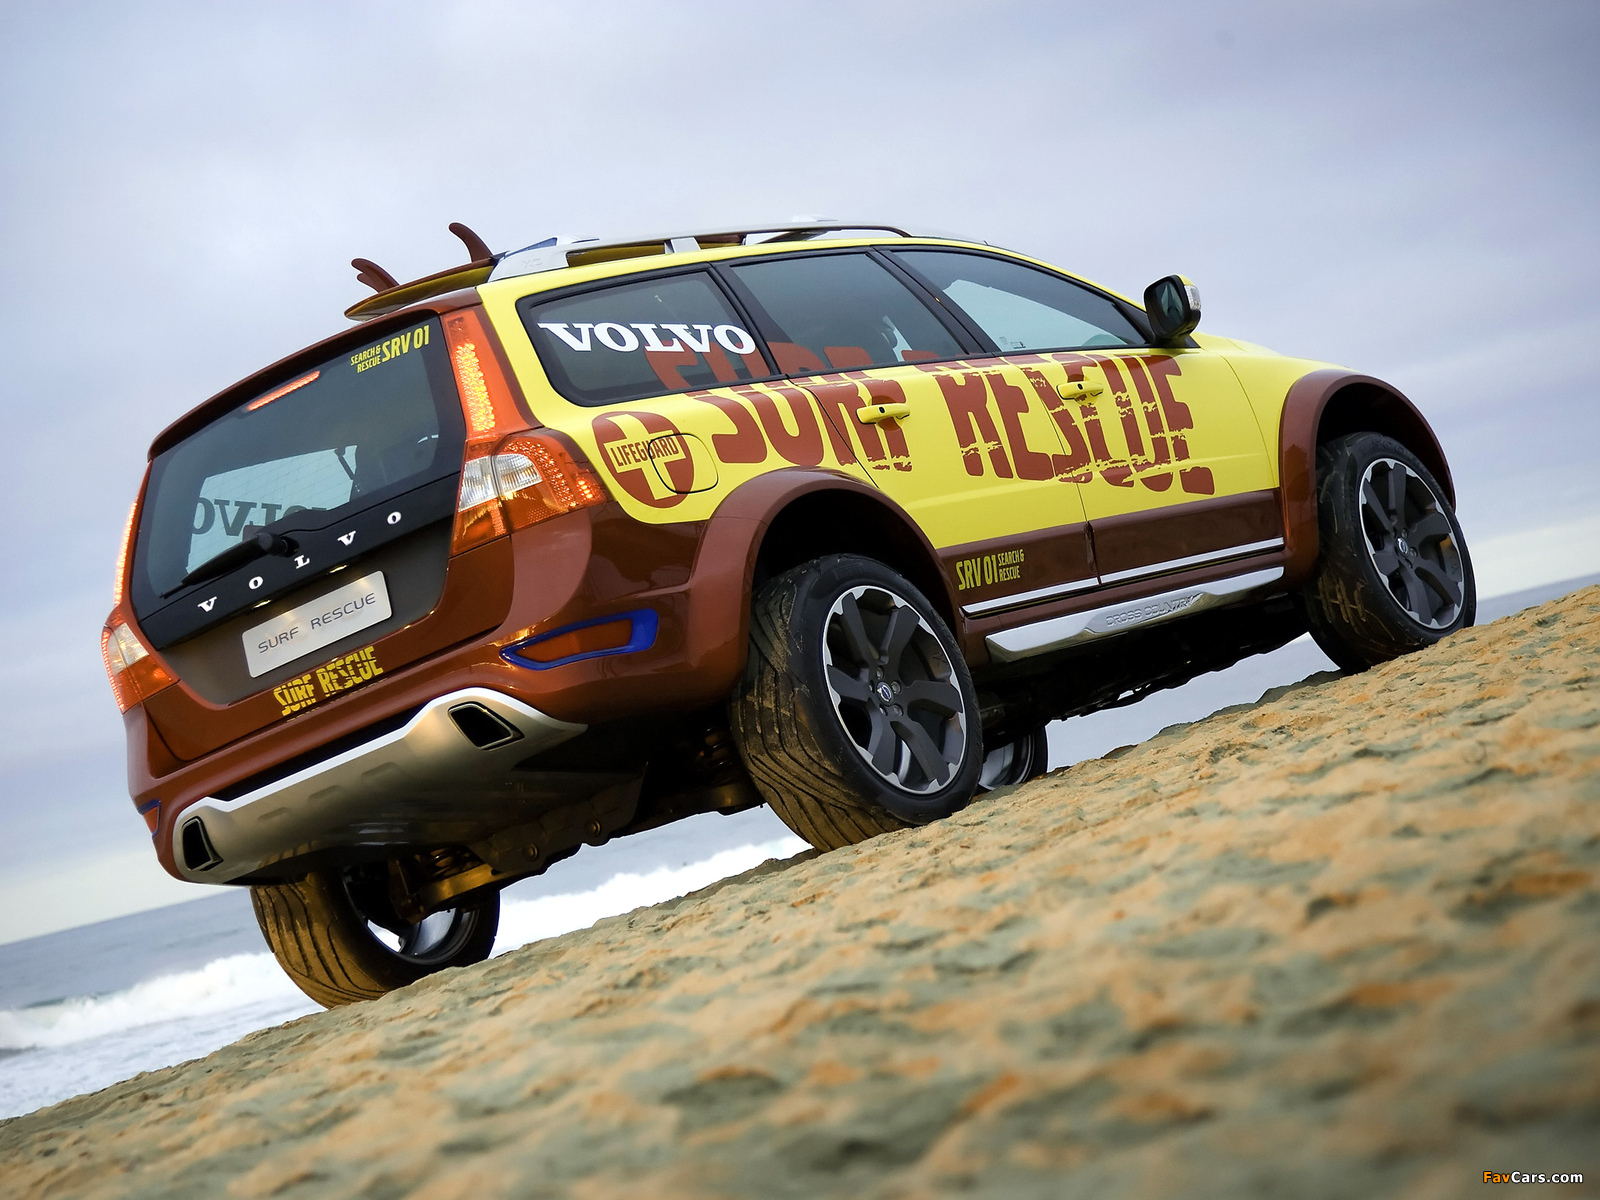 Volvo XC70 Surf Rescue Concept 2007 pictures (1600 x 1200)